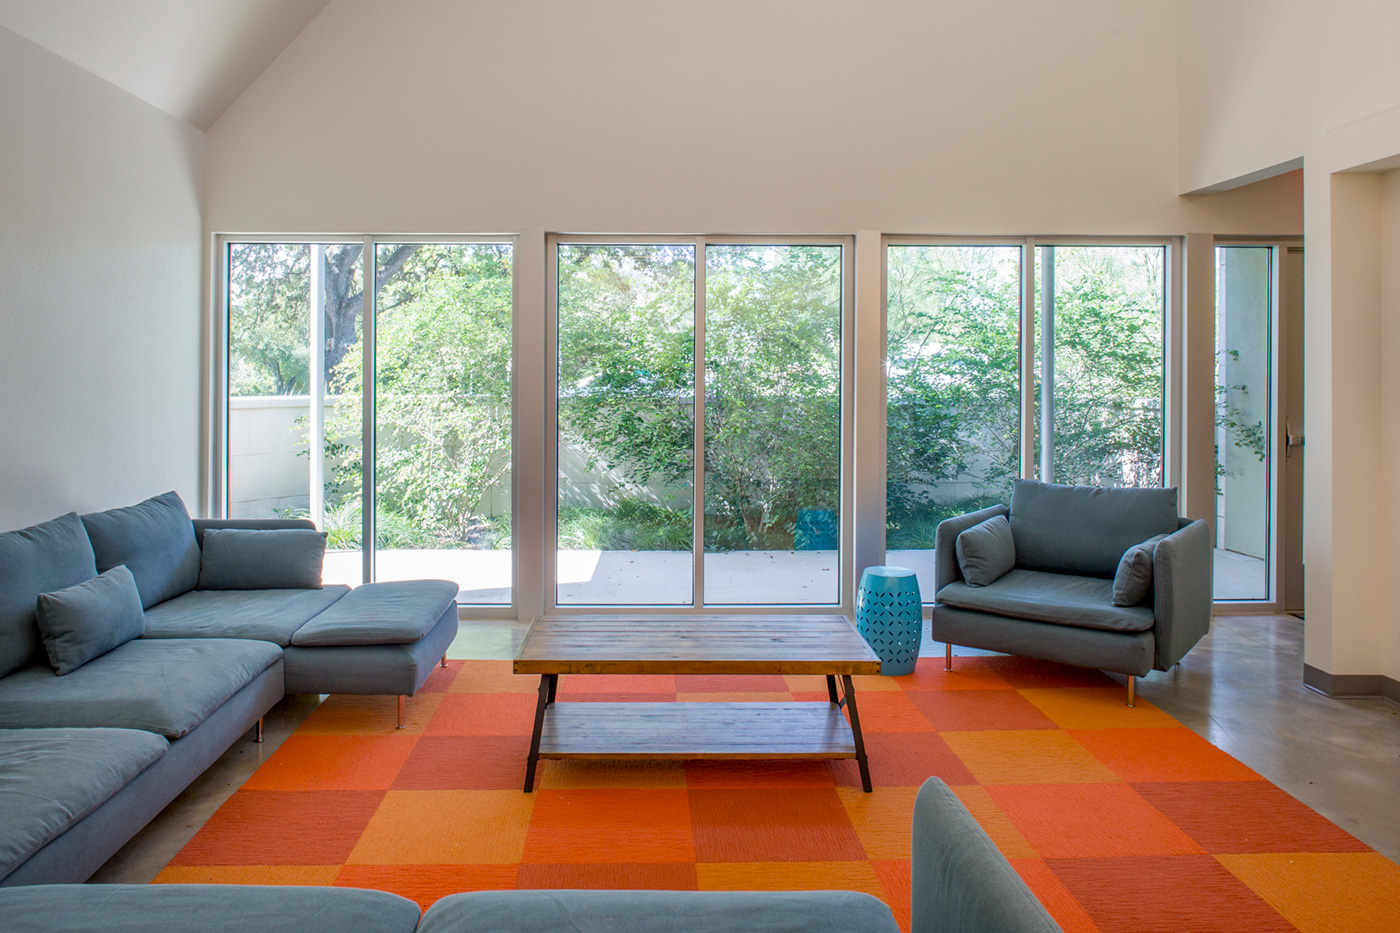 Seating area with a bright accent carpet.